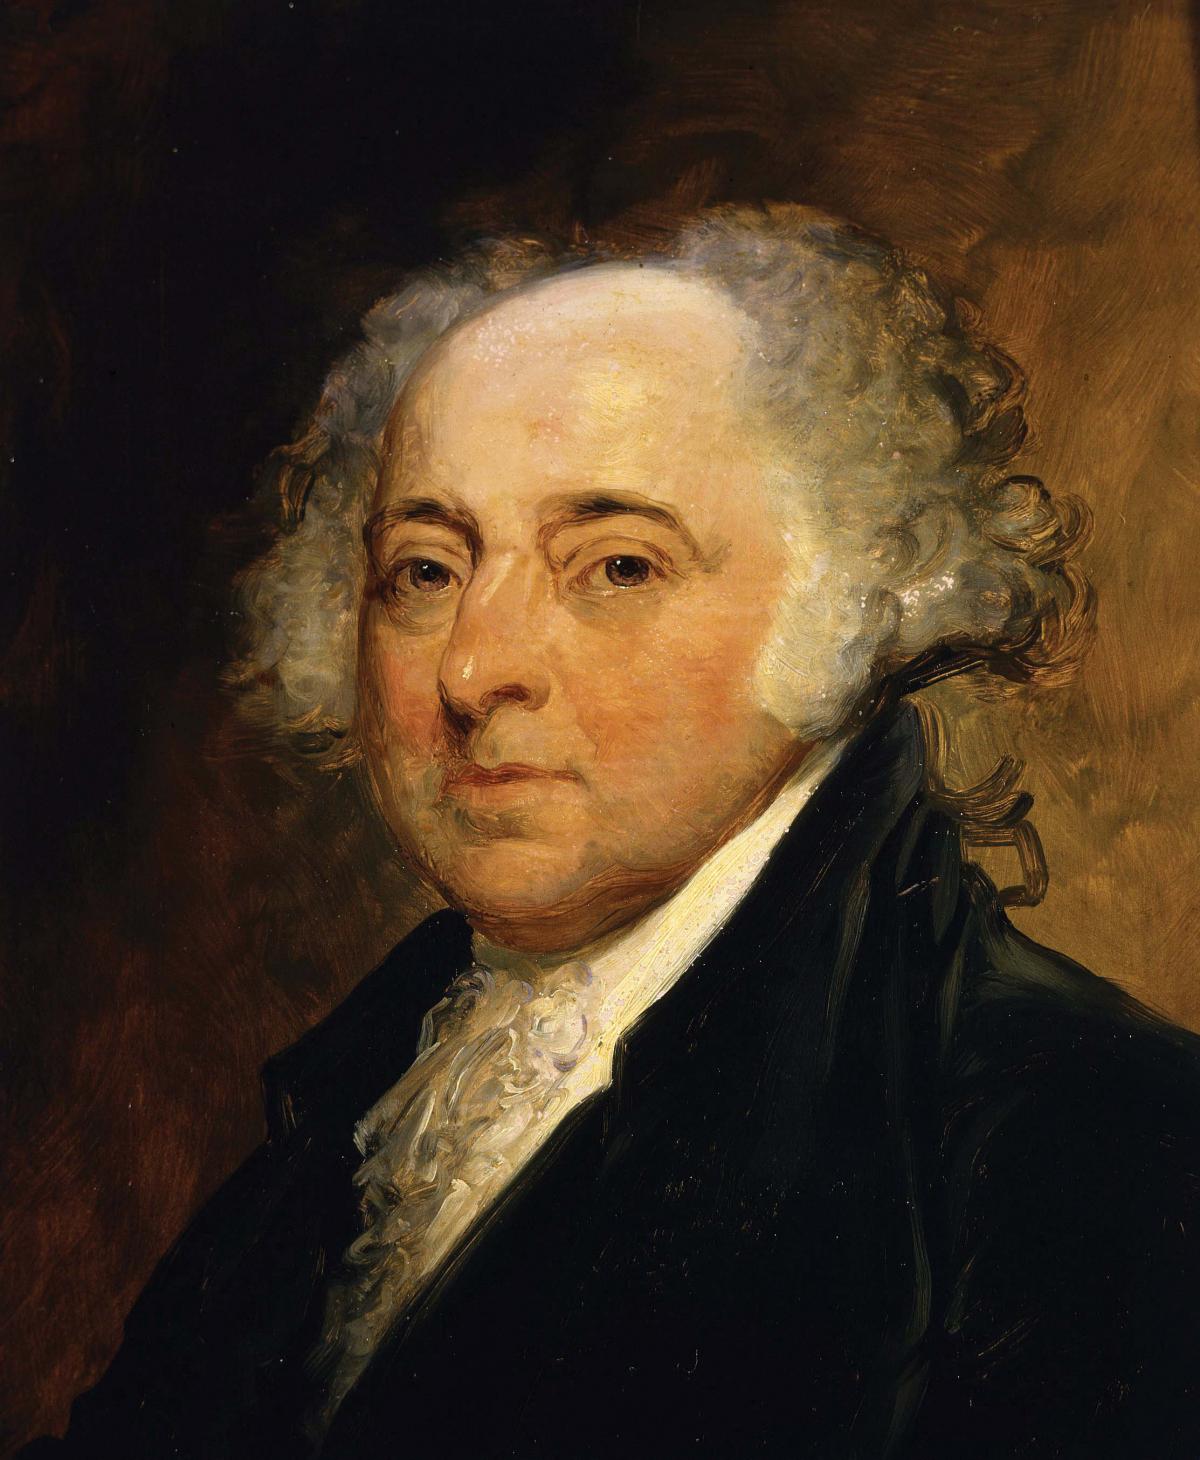 John Adams in a dark suit, head and shoulders portrait on a brown background